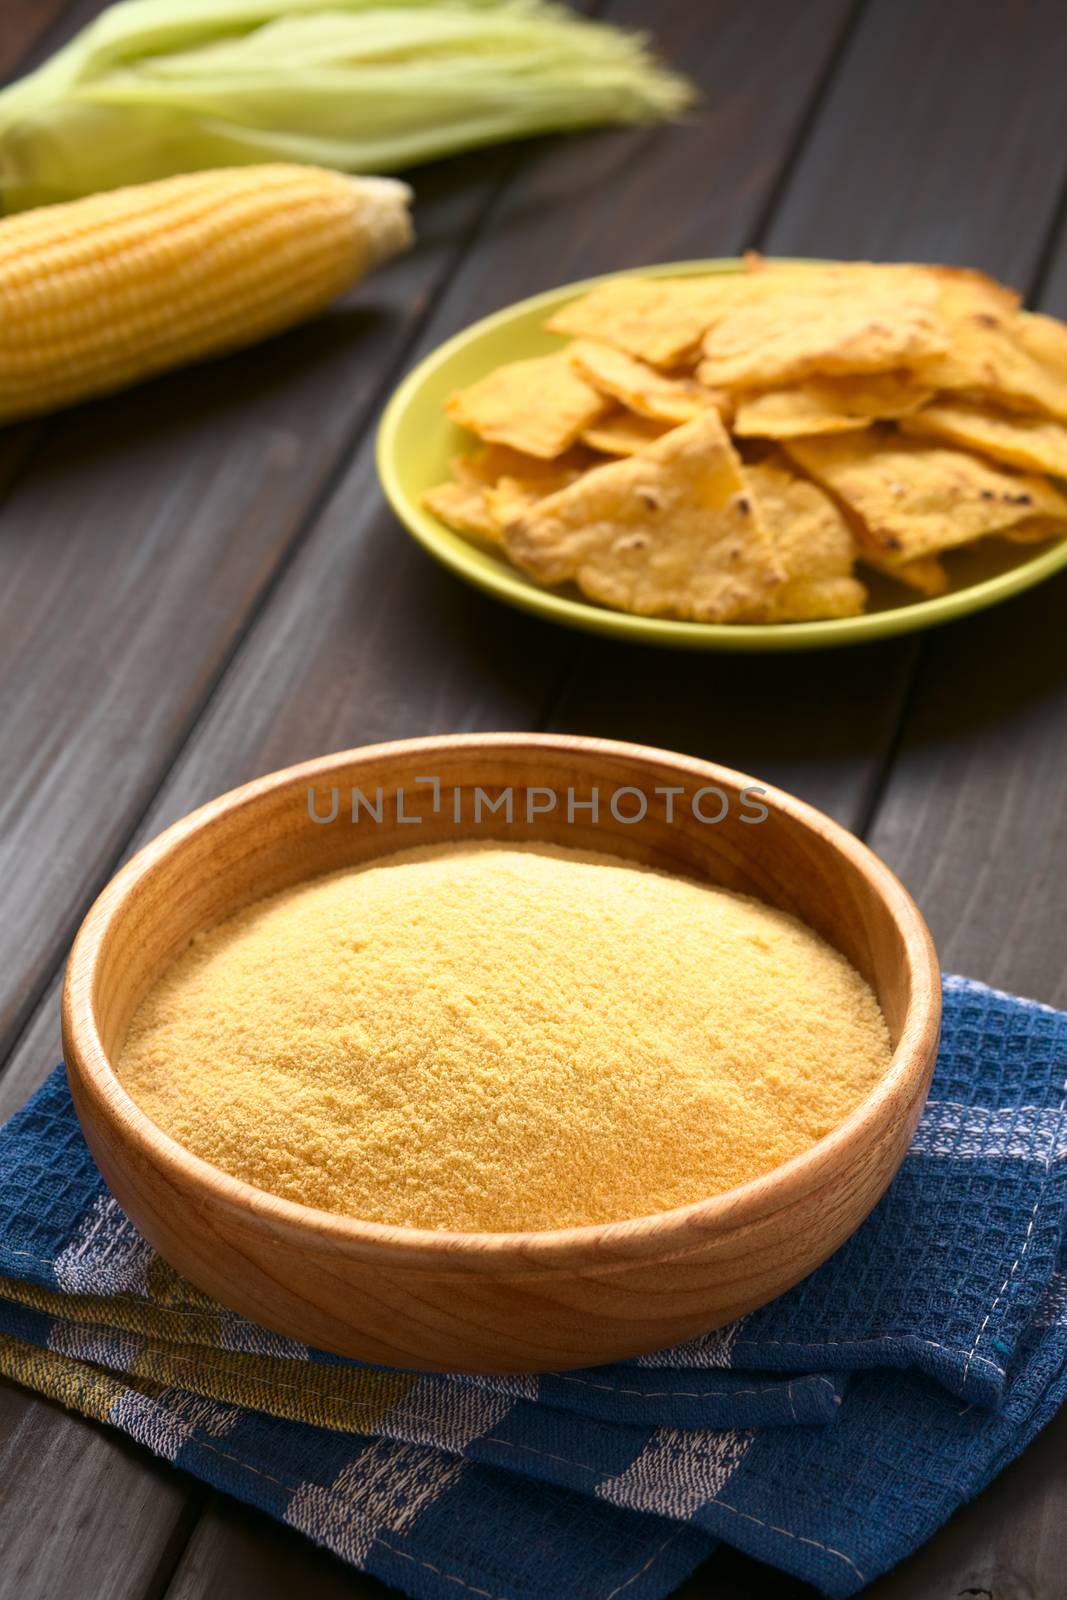 Wooden bowl of cornmeal with homemade tortilla chips and cobs of corn in the back, photographed on dark wood with natural light (Selective Focus, Focus one third into the cornmeal)